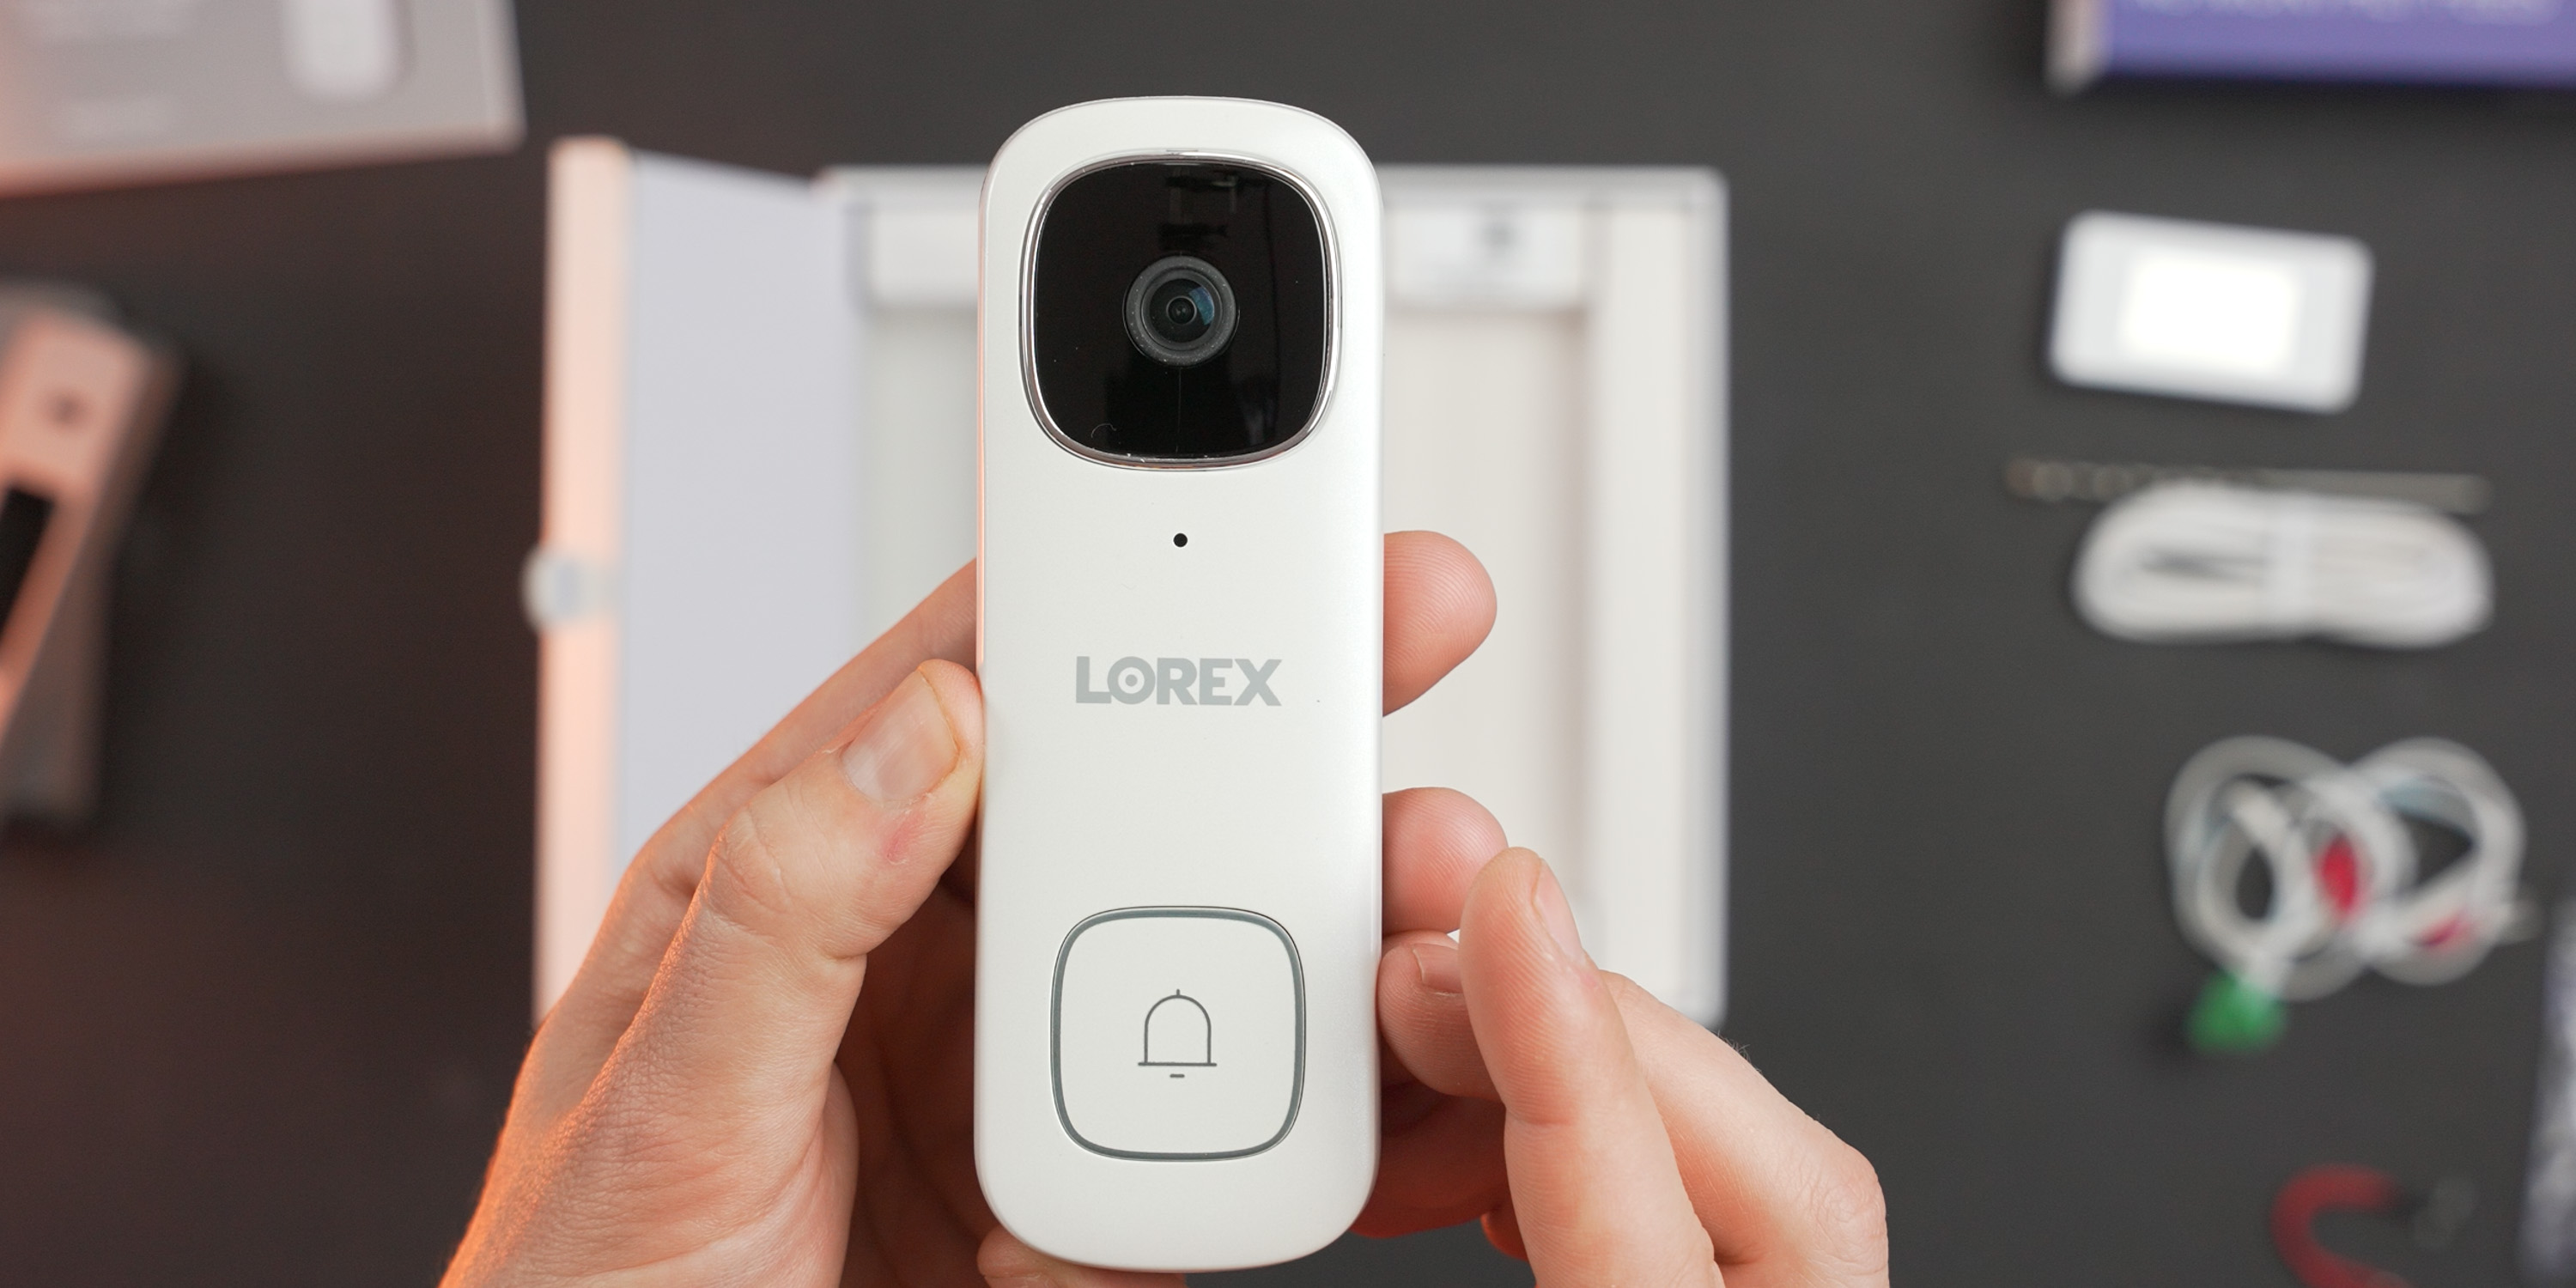 Lorex 2K Video Doorbell Review: Feature packed with no monthly fees